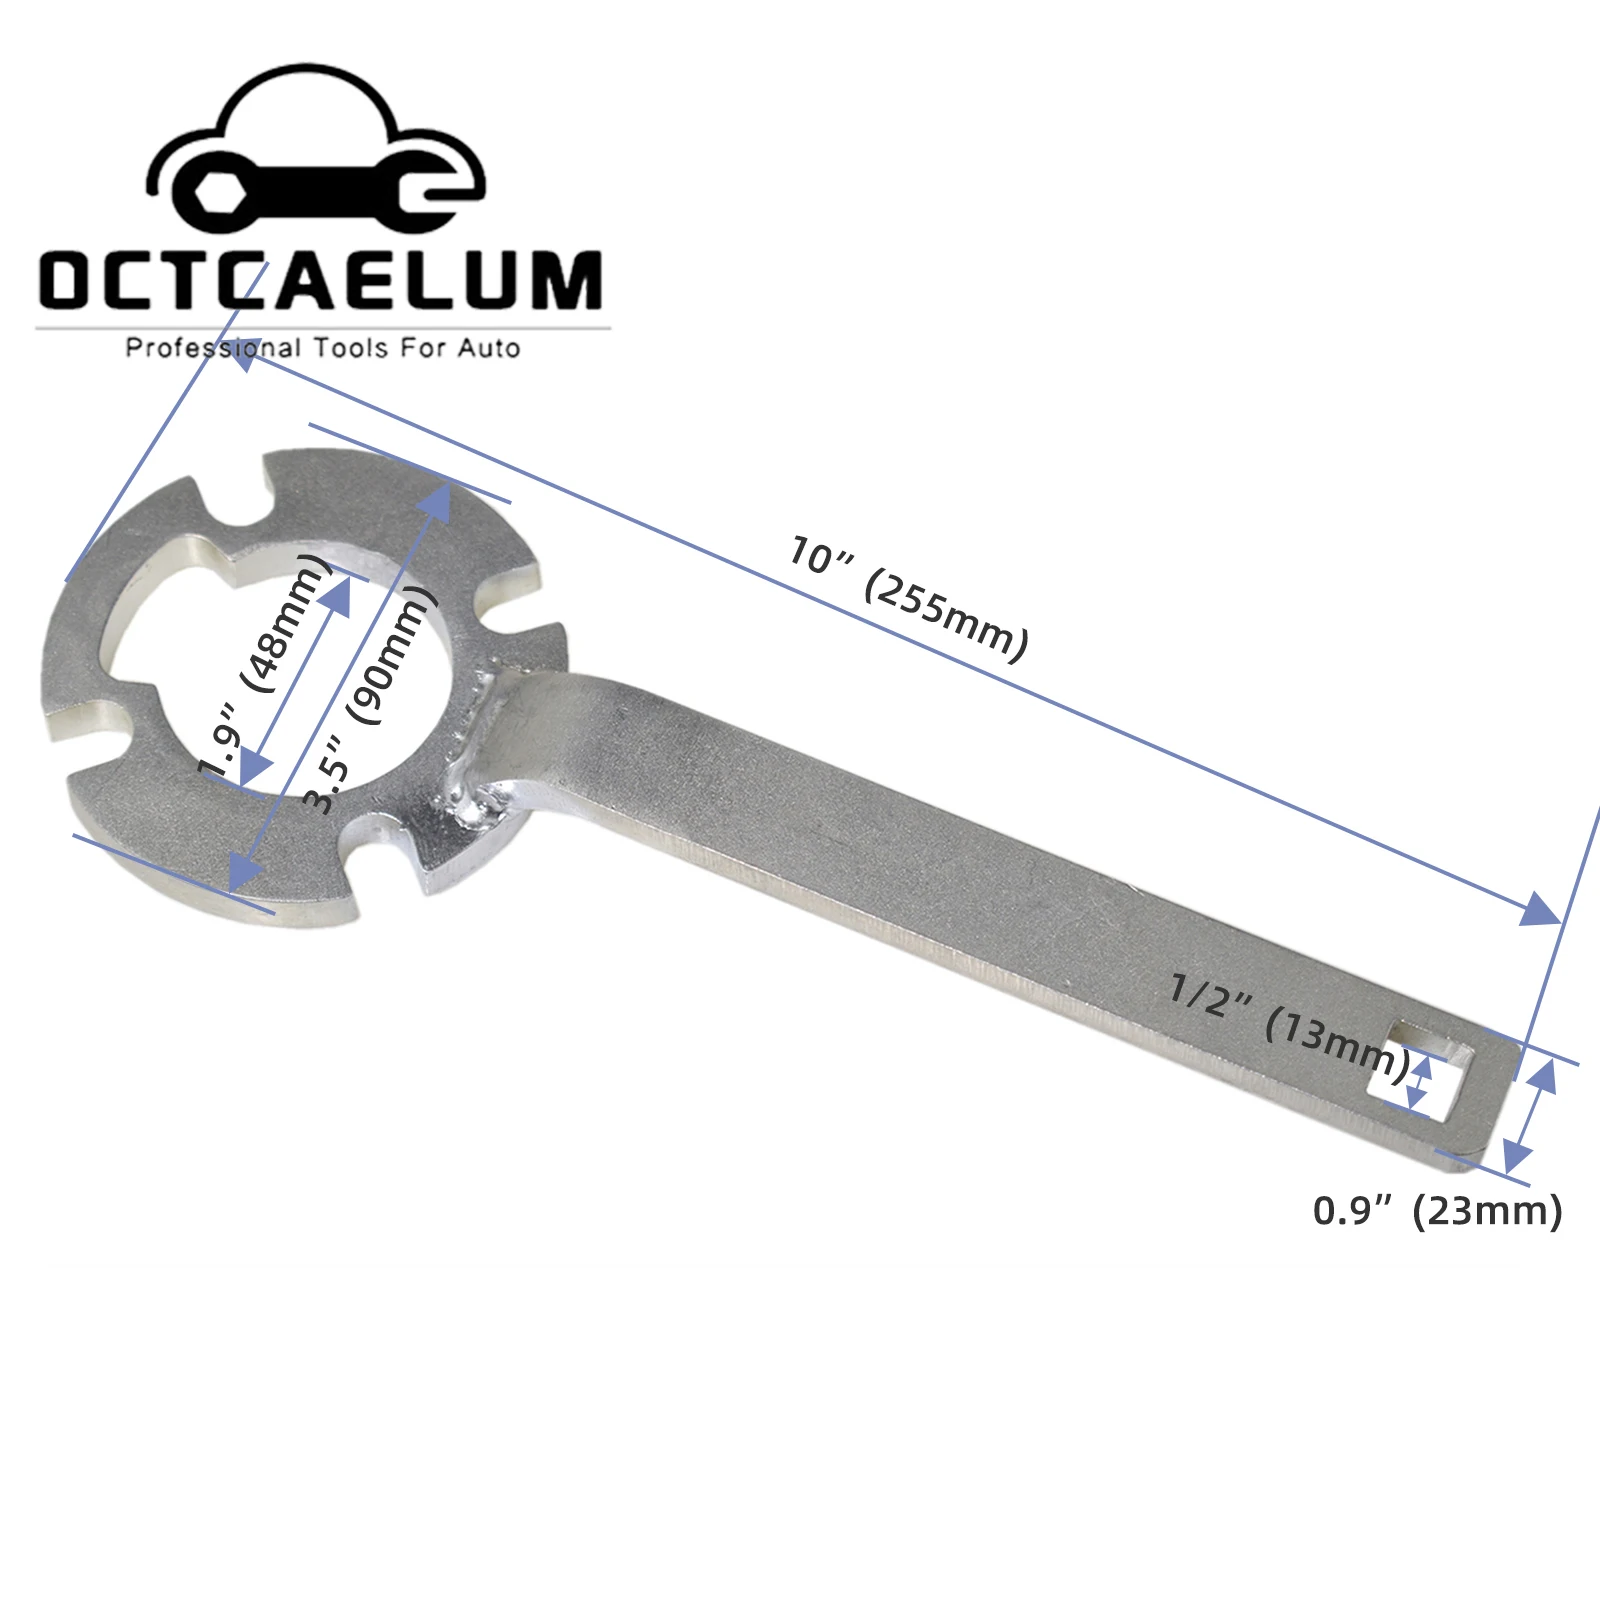 Le meilleur prix pourTiming Locking Sprocket Wrench Pulley